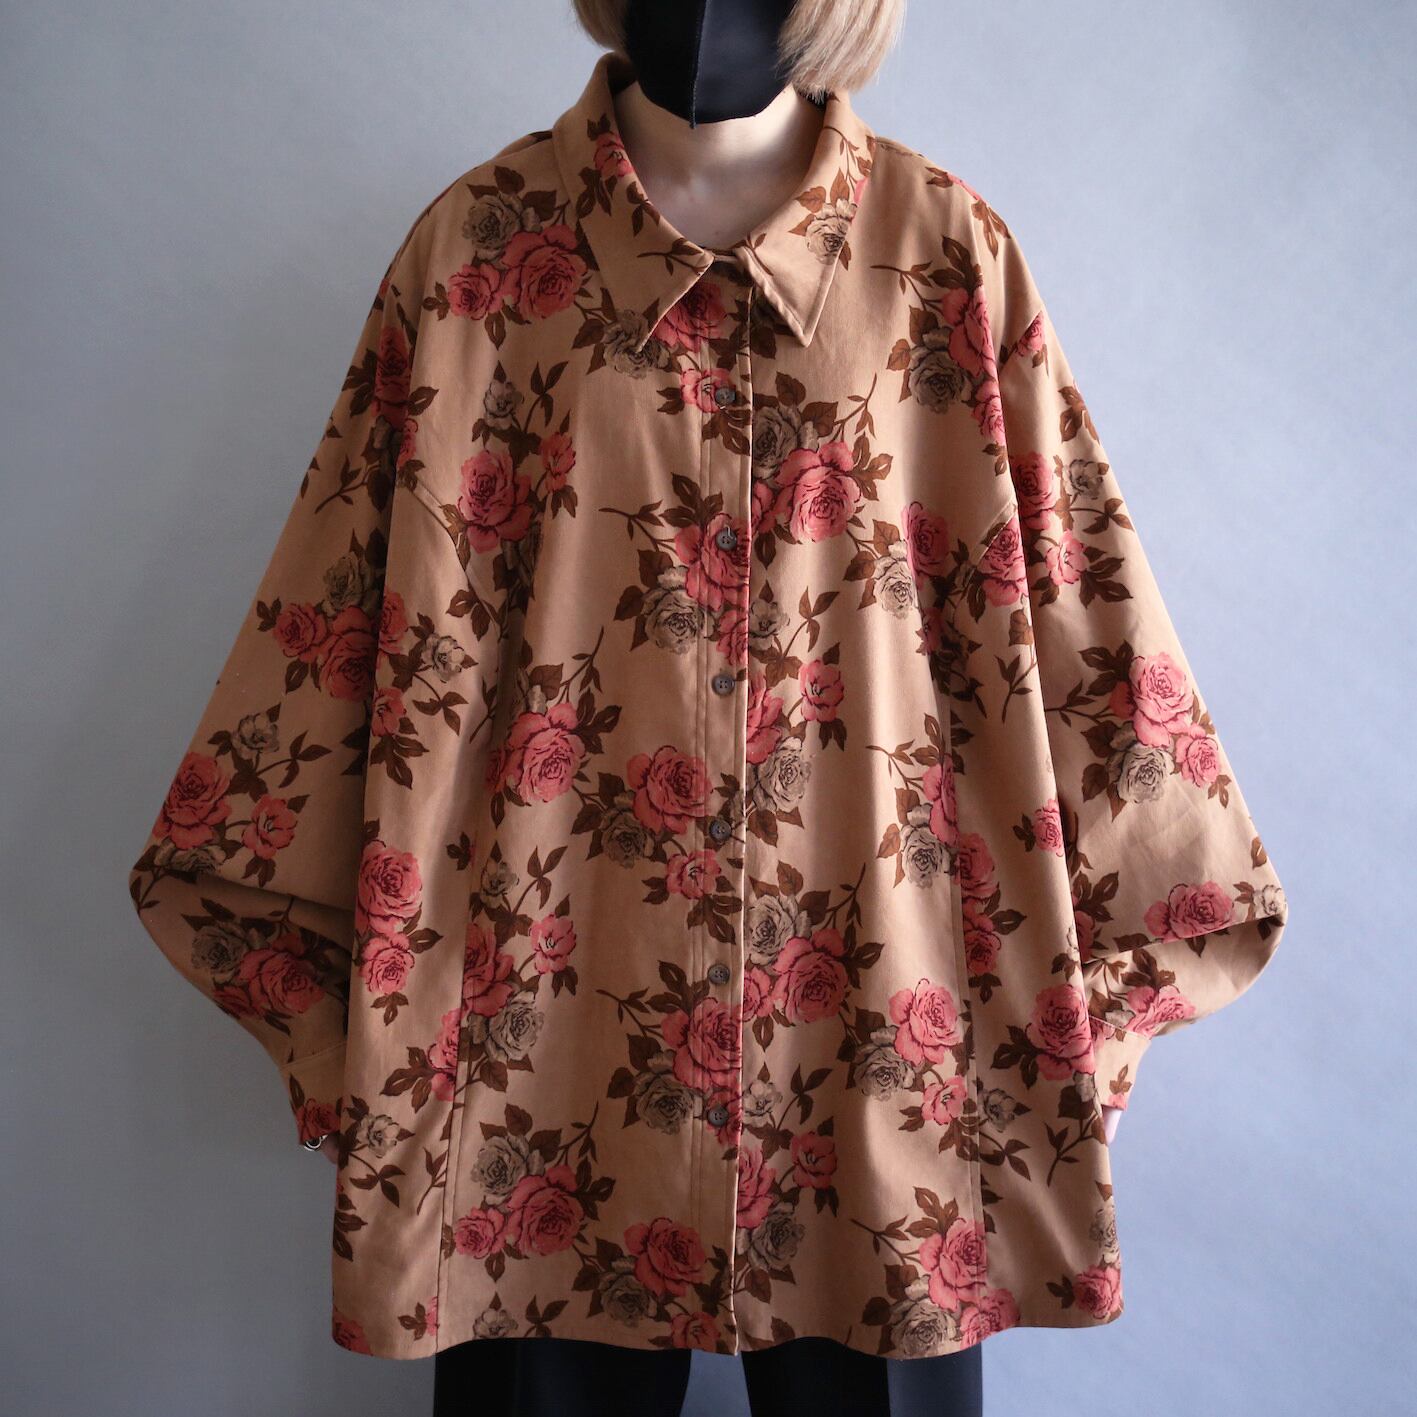 flower art full pattern over size  wide silhouette fake suede shirt jacket